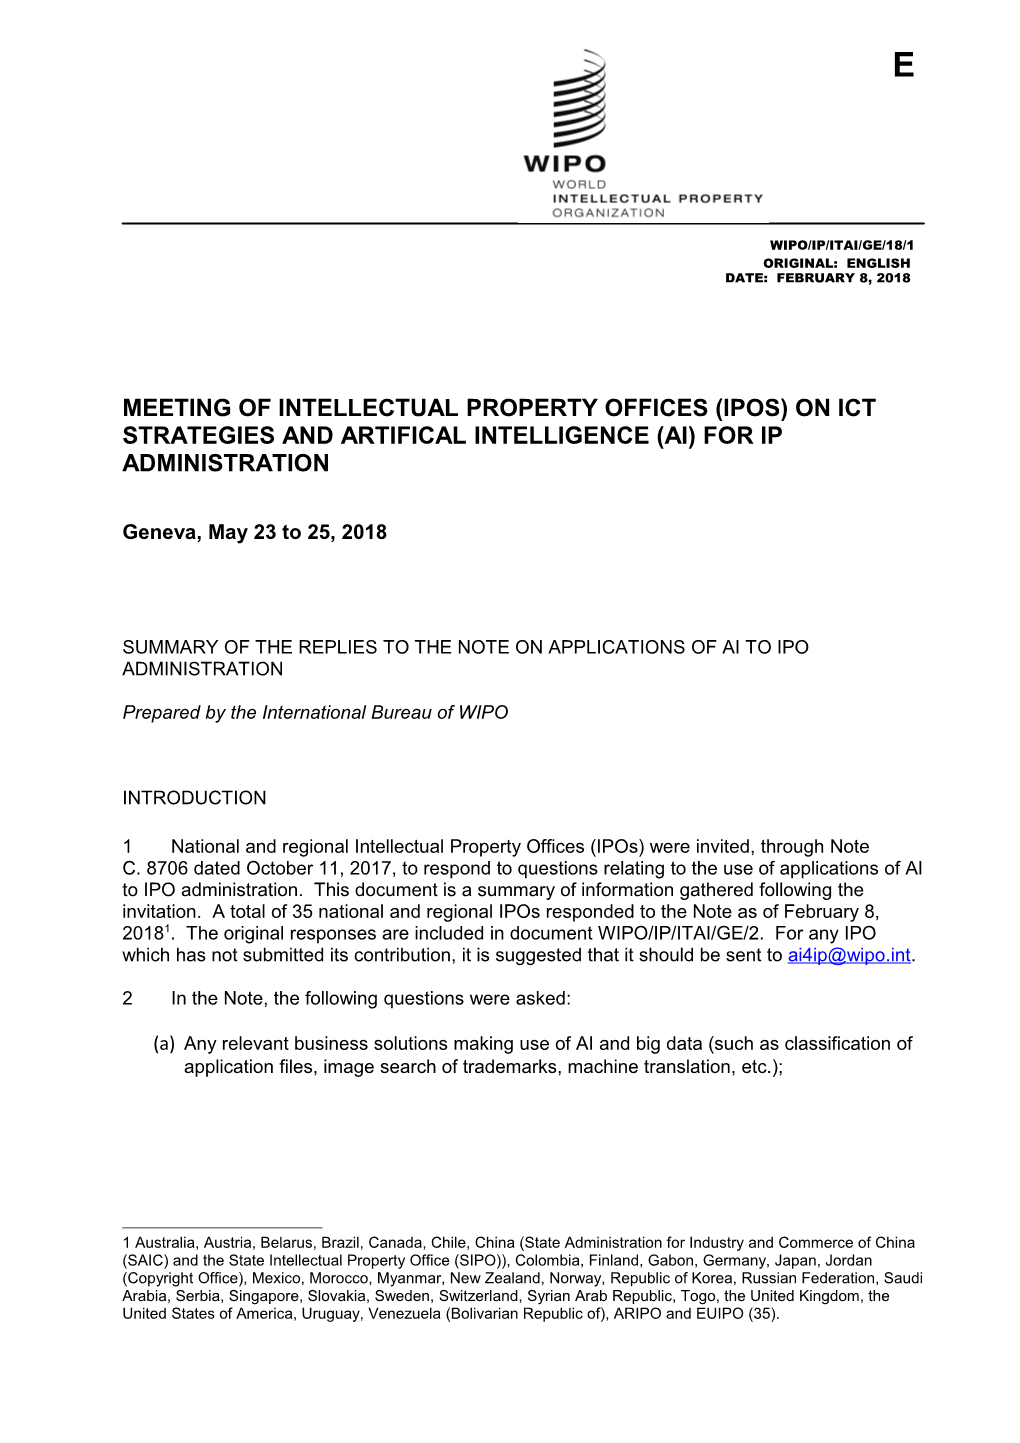 Meeting of Intellectual Property Offices (Ipos) on Ict Strategies and Artifical Intelligence